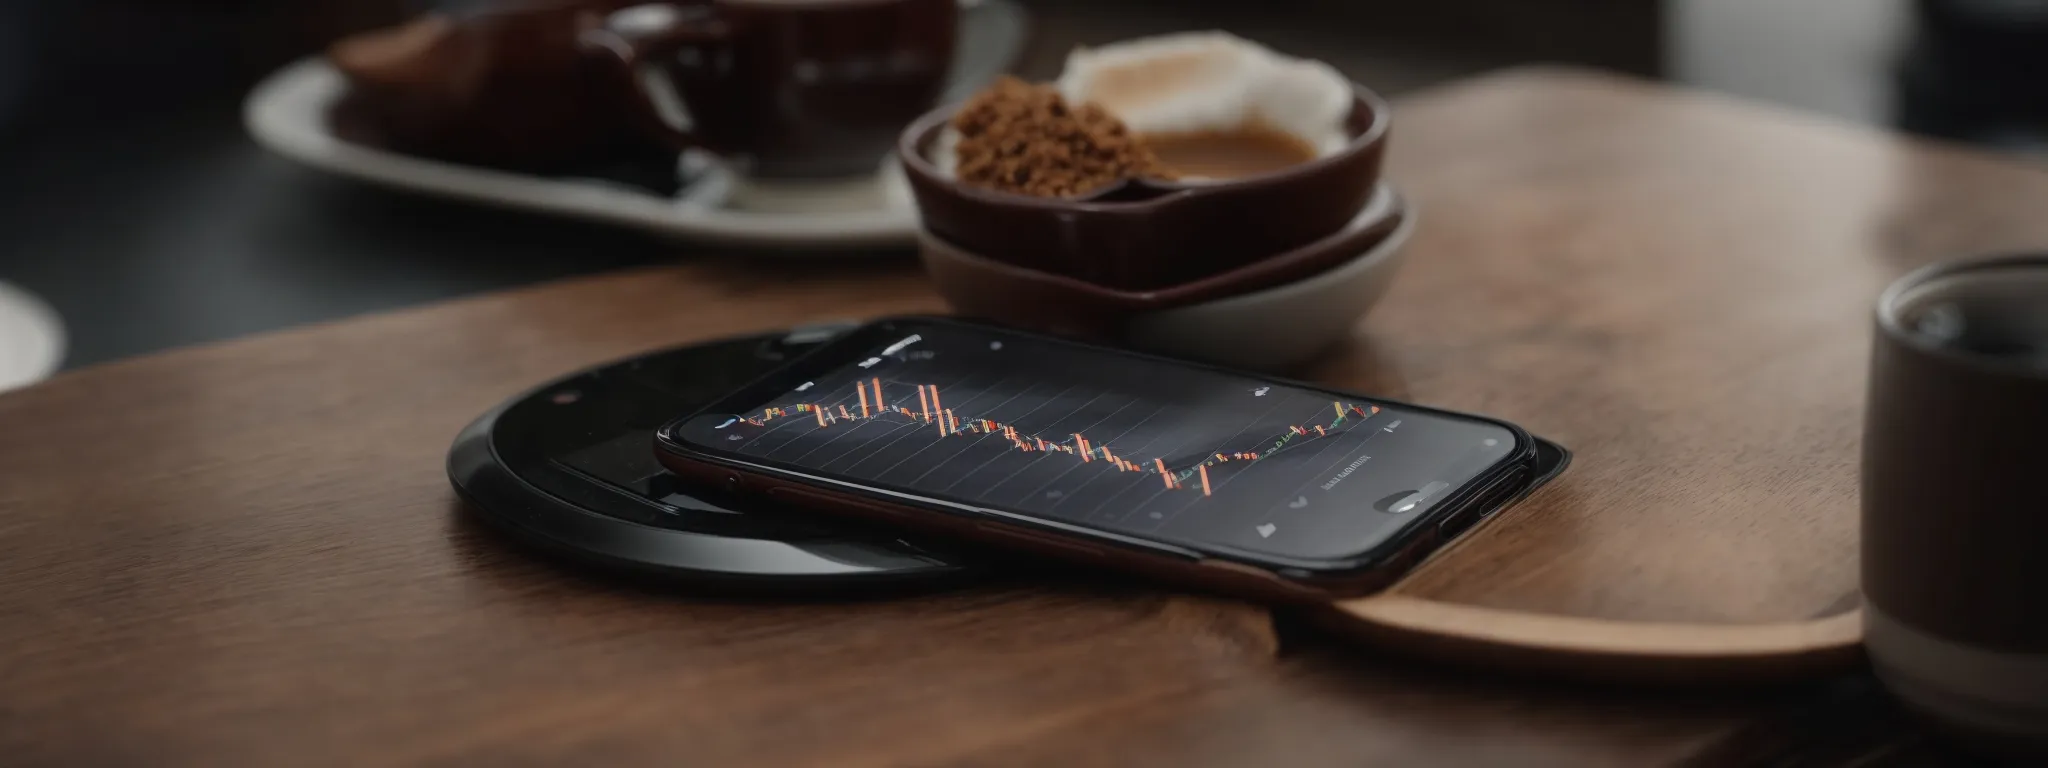 a smartphone displaying a graph of upward trend on its screen, placed on a wooden table beside a cup of coffee.